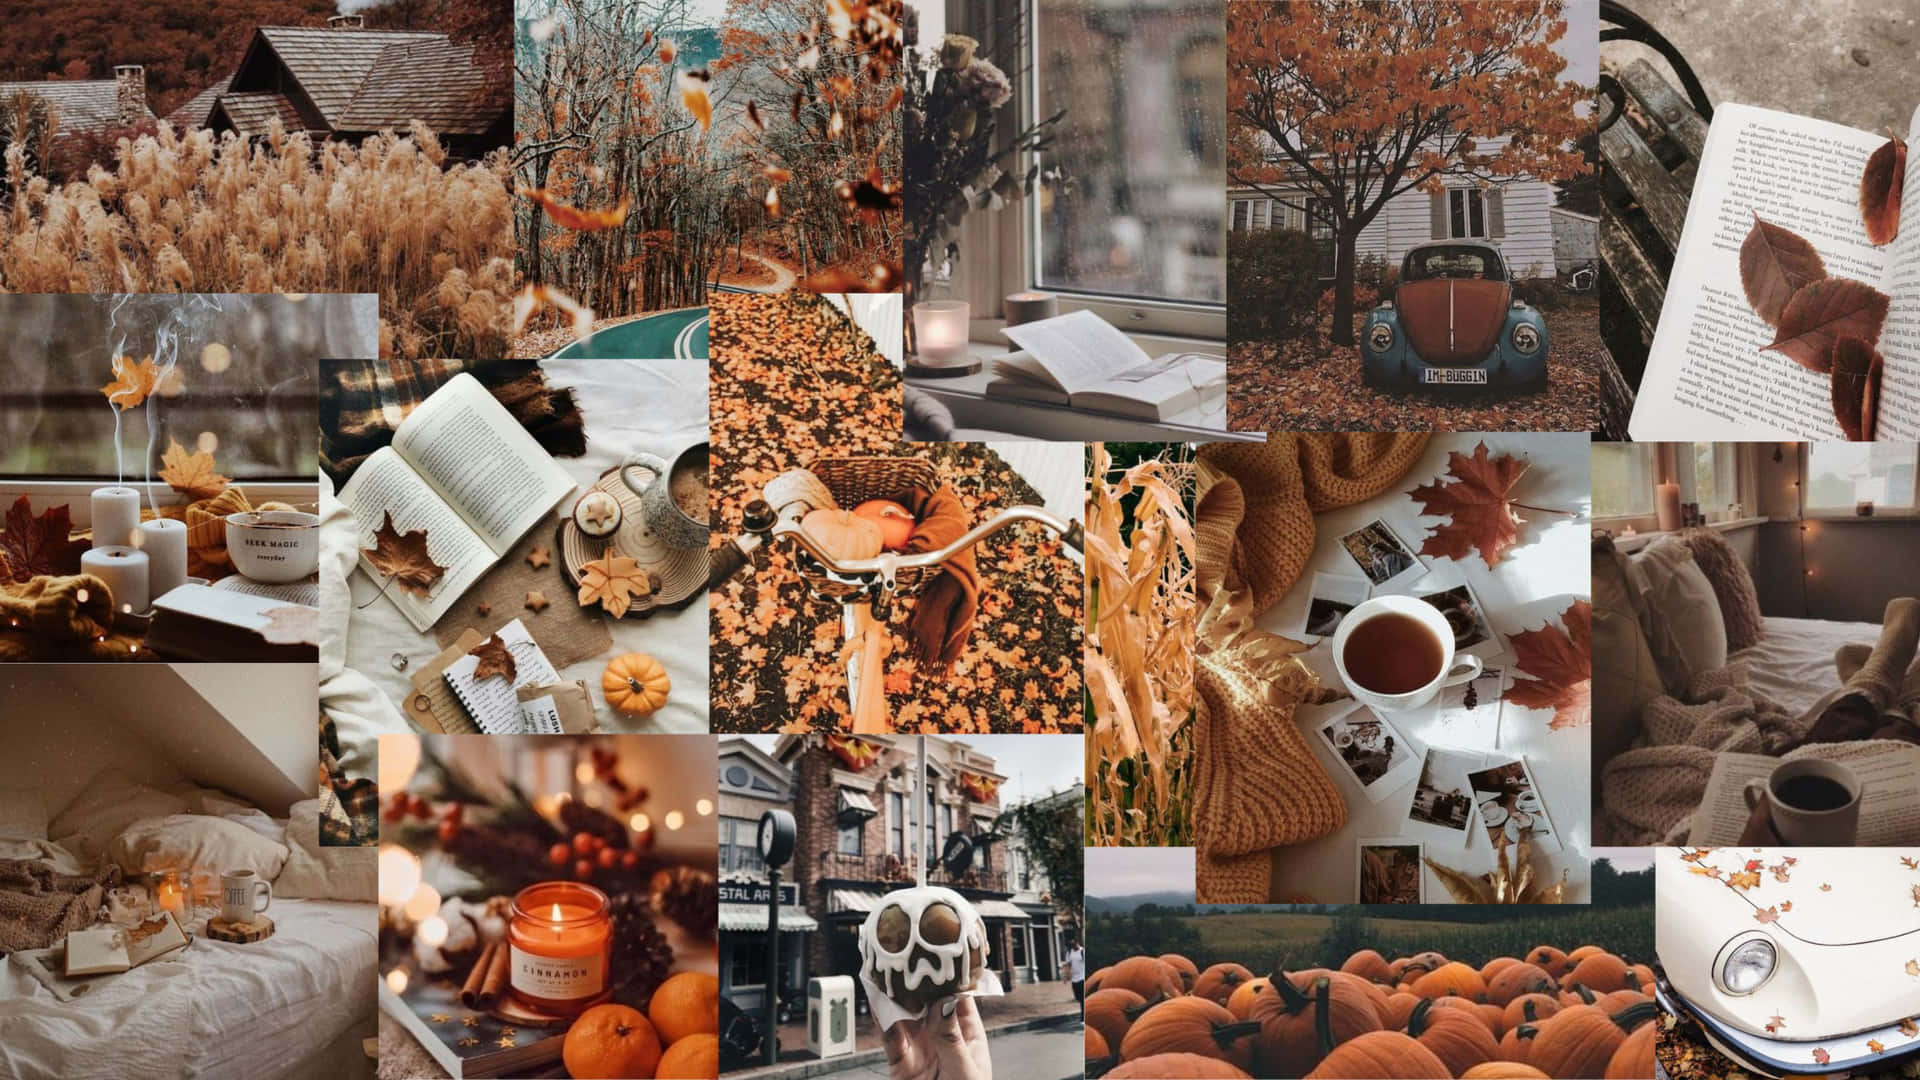 Download A Bright and Colorful Autumn Collage Wallpaper | Wallpapers.com